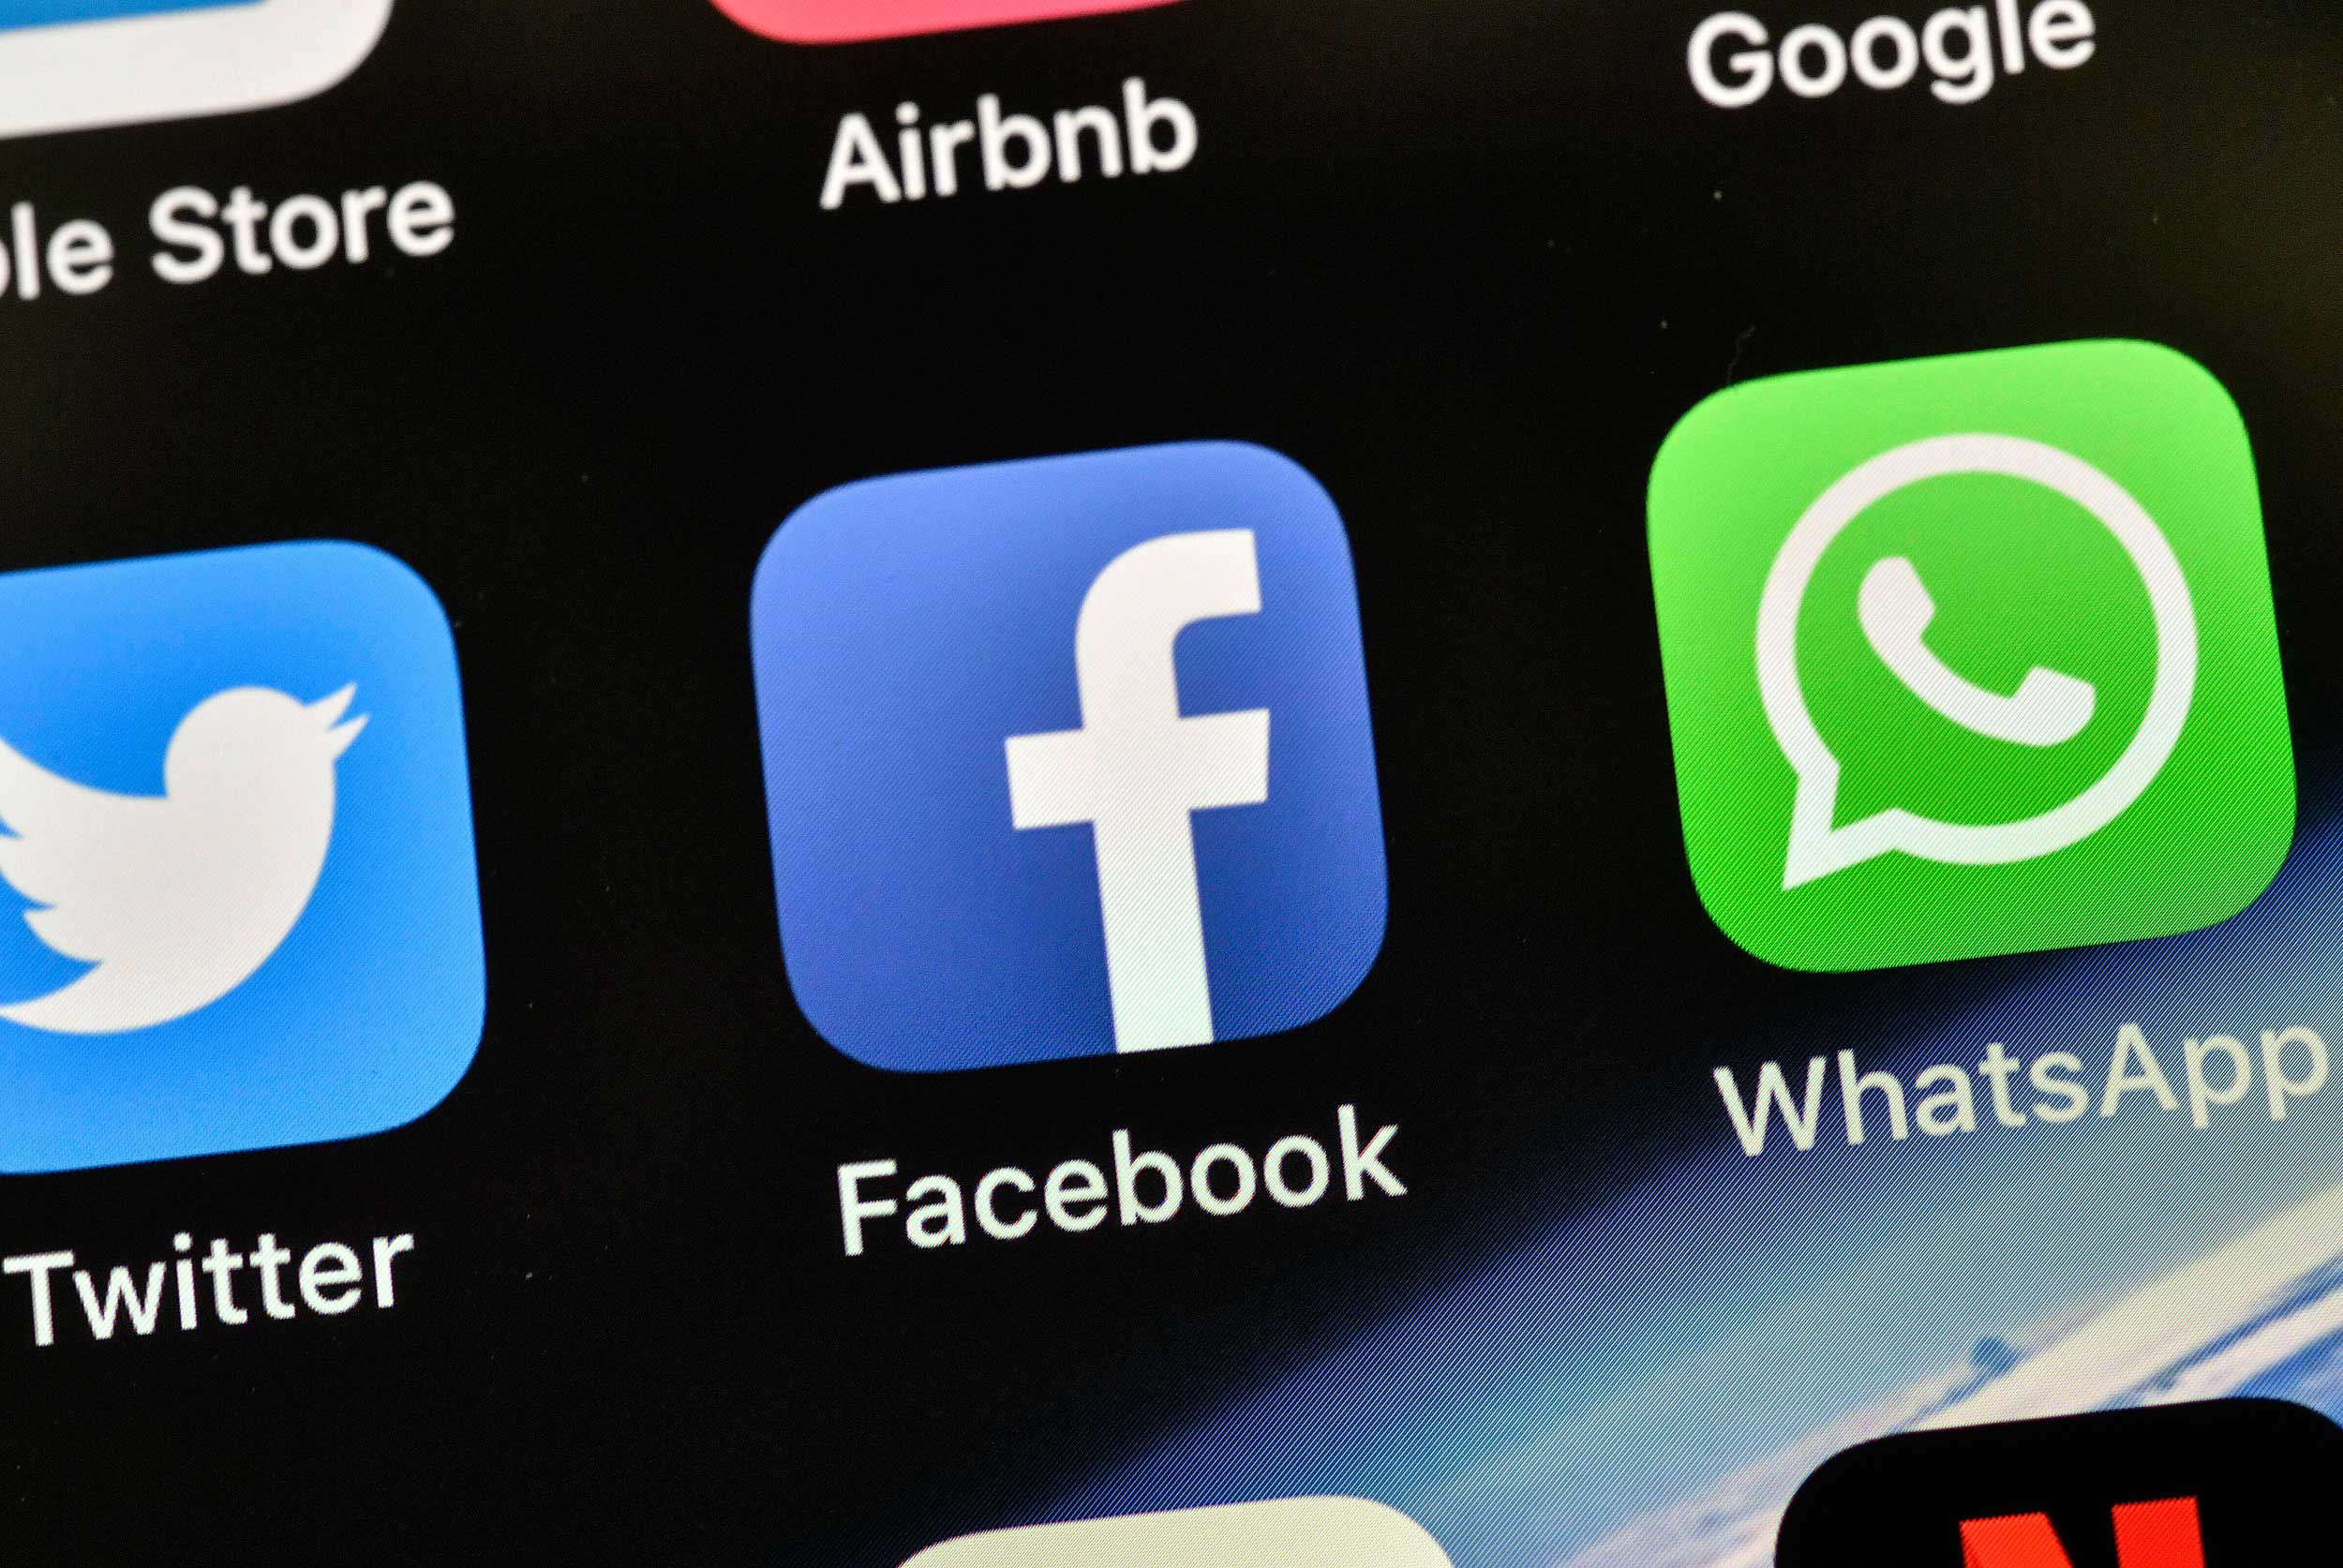 It is incumbent on Parliament, the judiciary and Facebook, the company that owns WhatsApp, to plug the breach of privacy and nail those responsible for it.